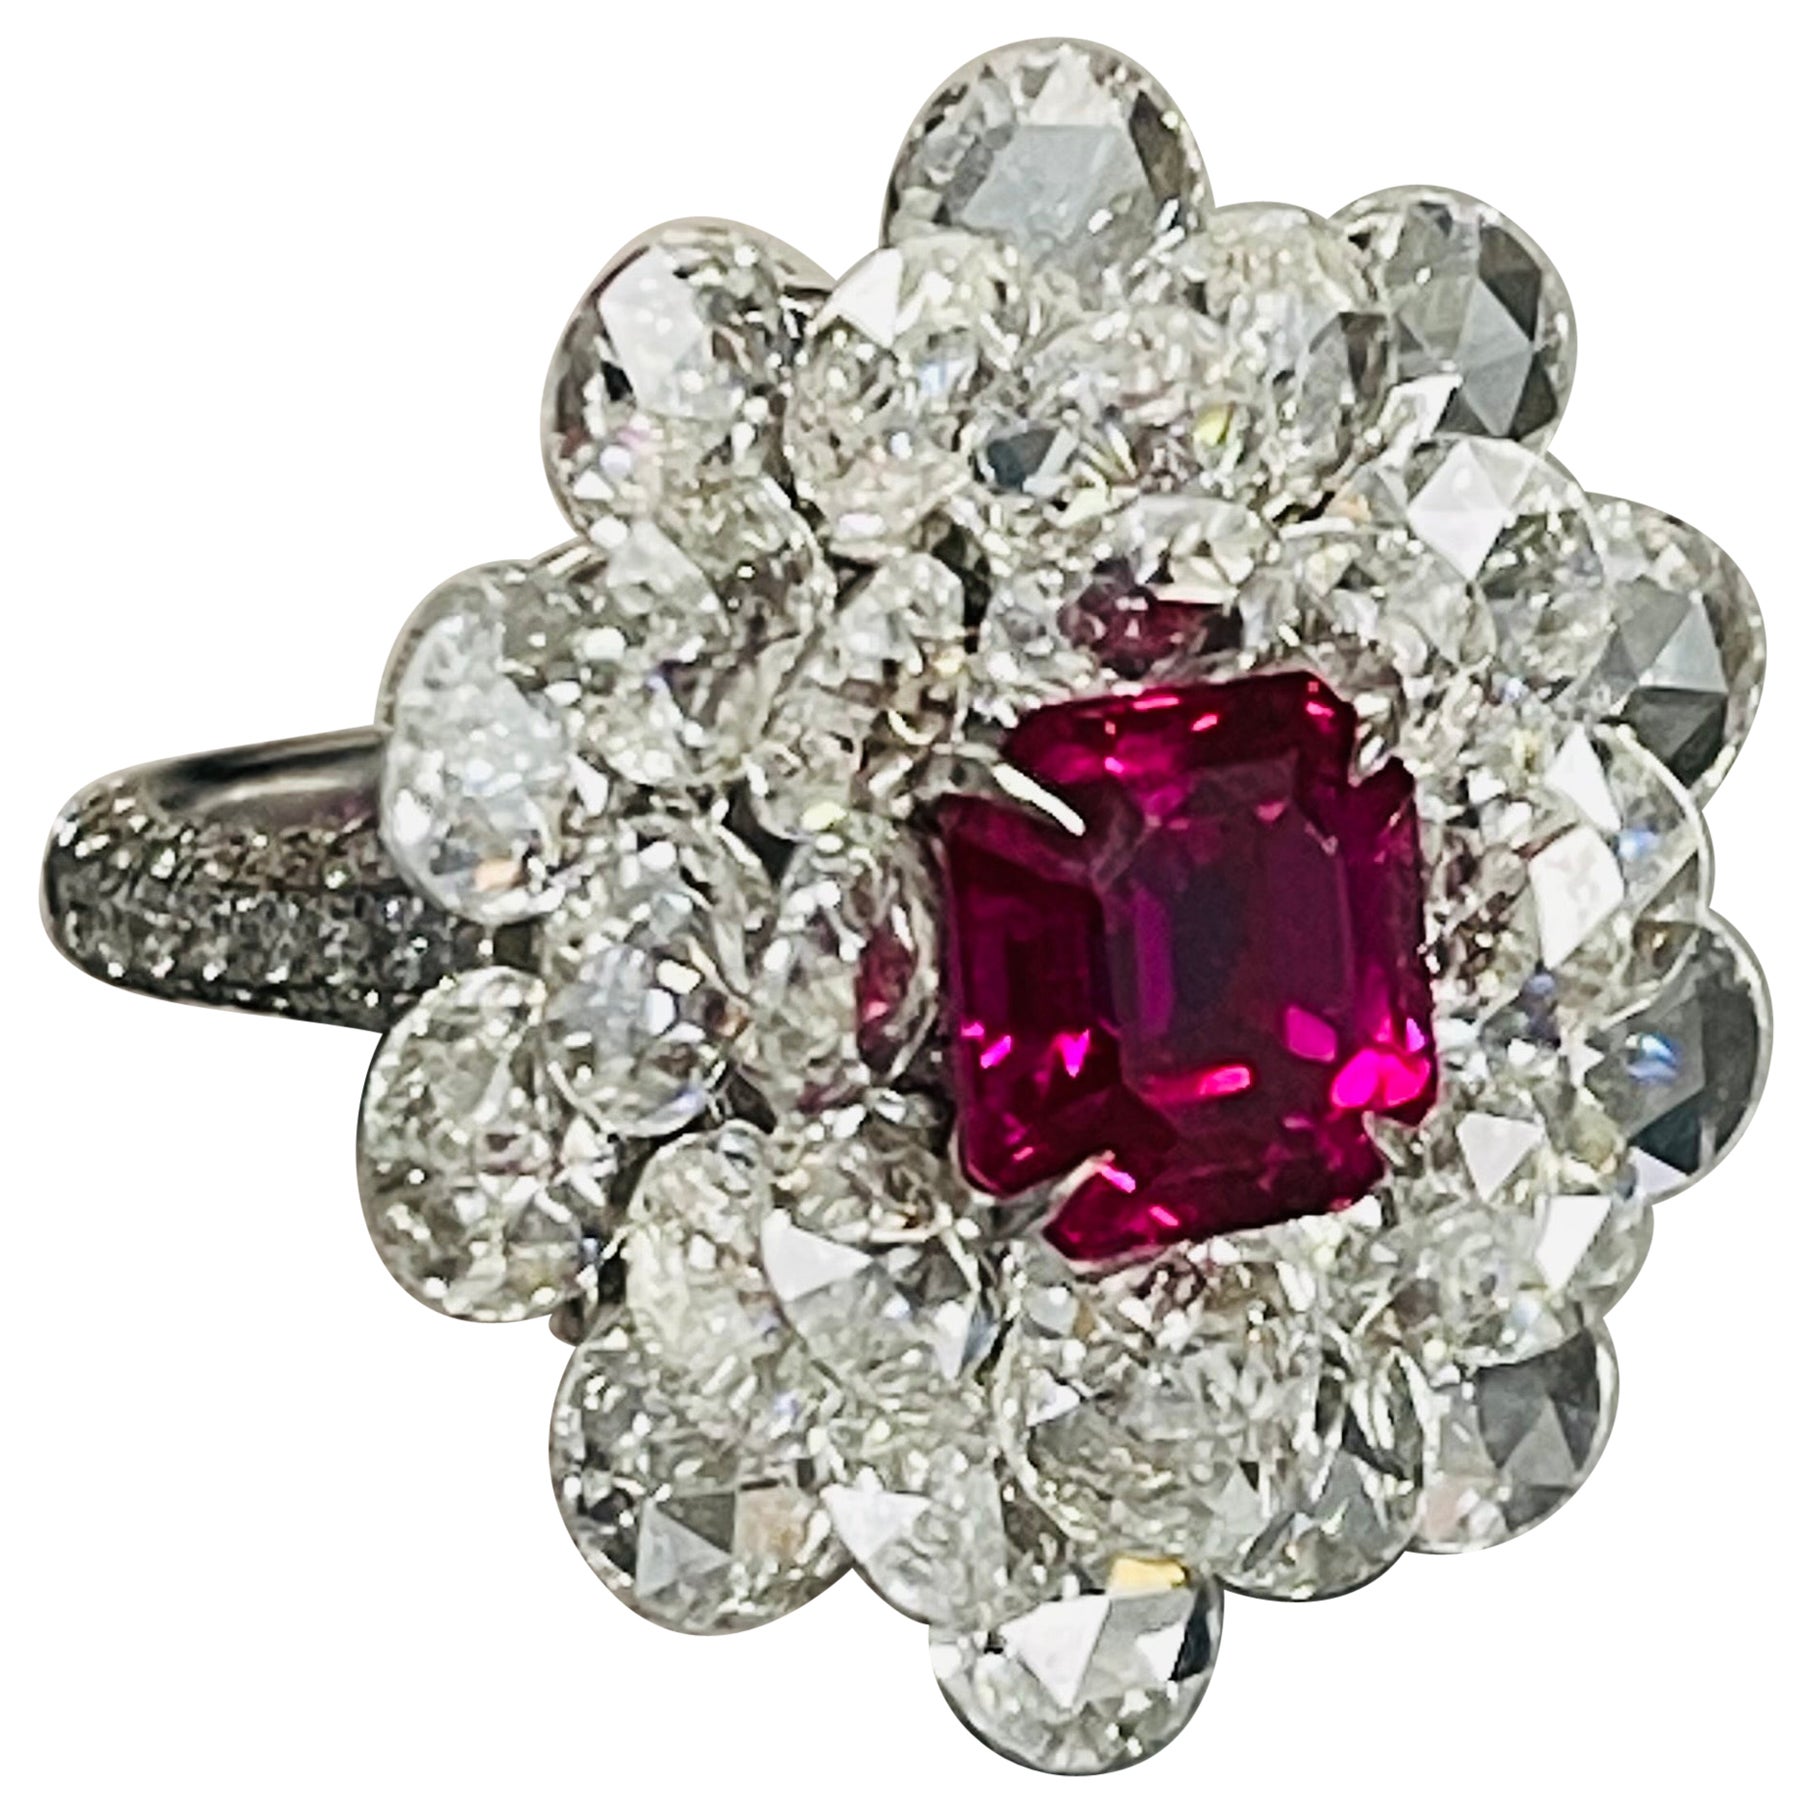   Ruby And Diamond Ring , BURMA NO HEAT GUBELIN AND GIA CERTIFIED  For Sale